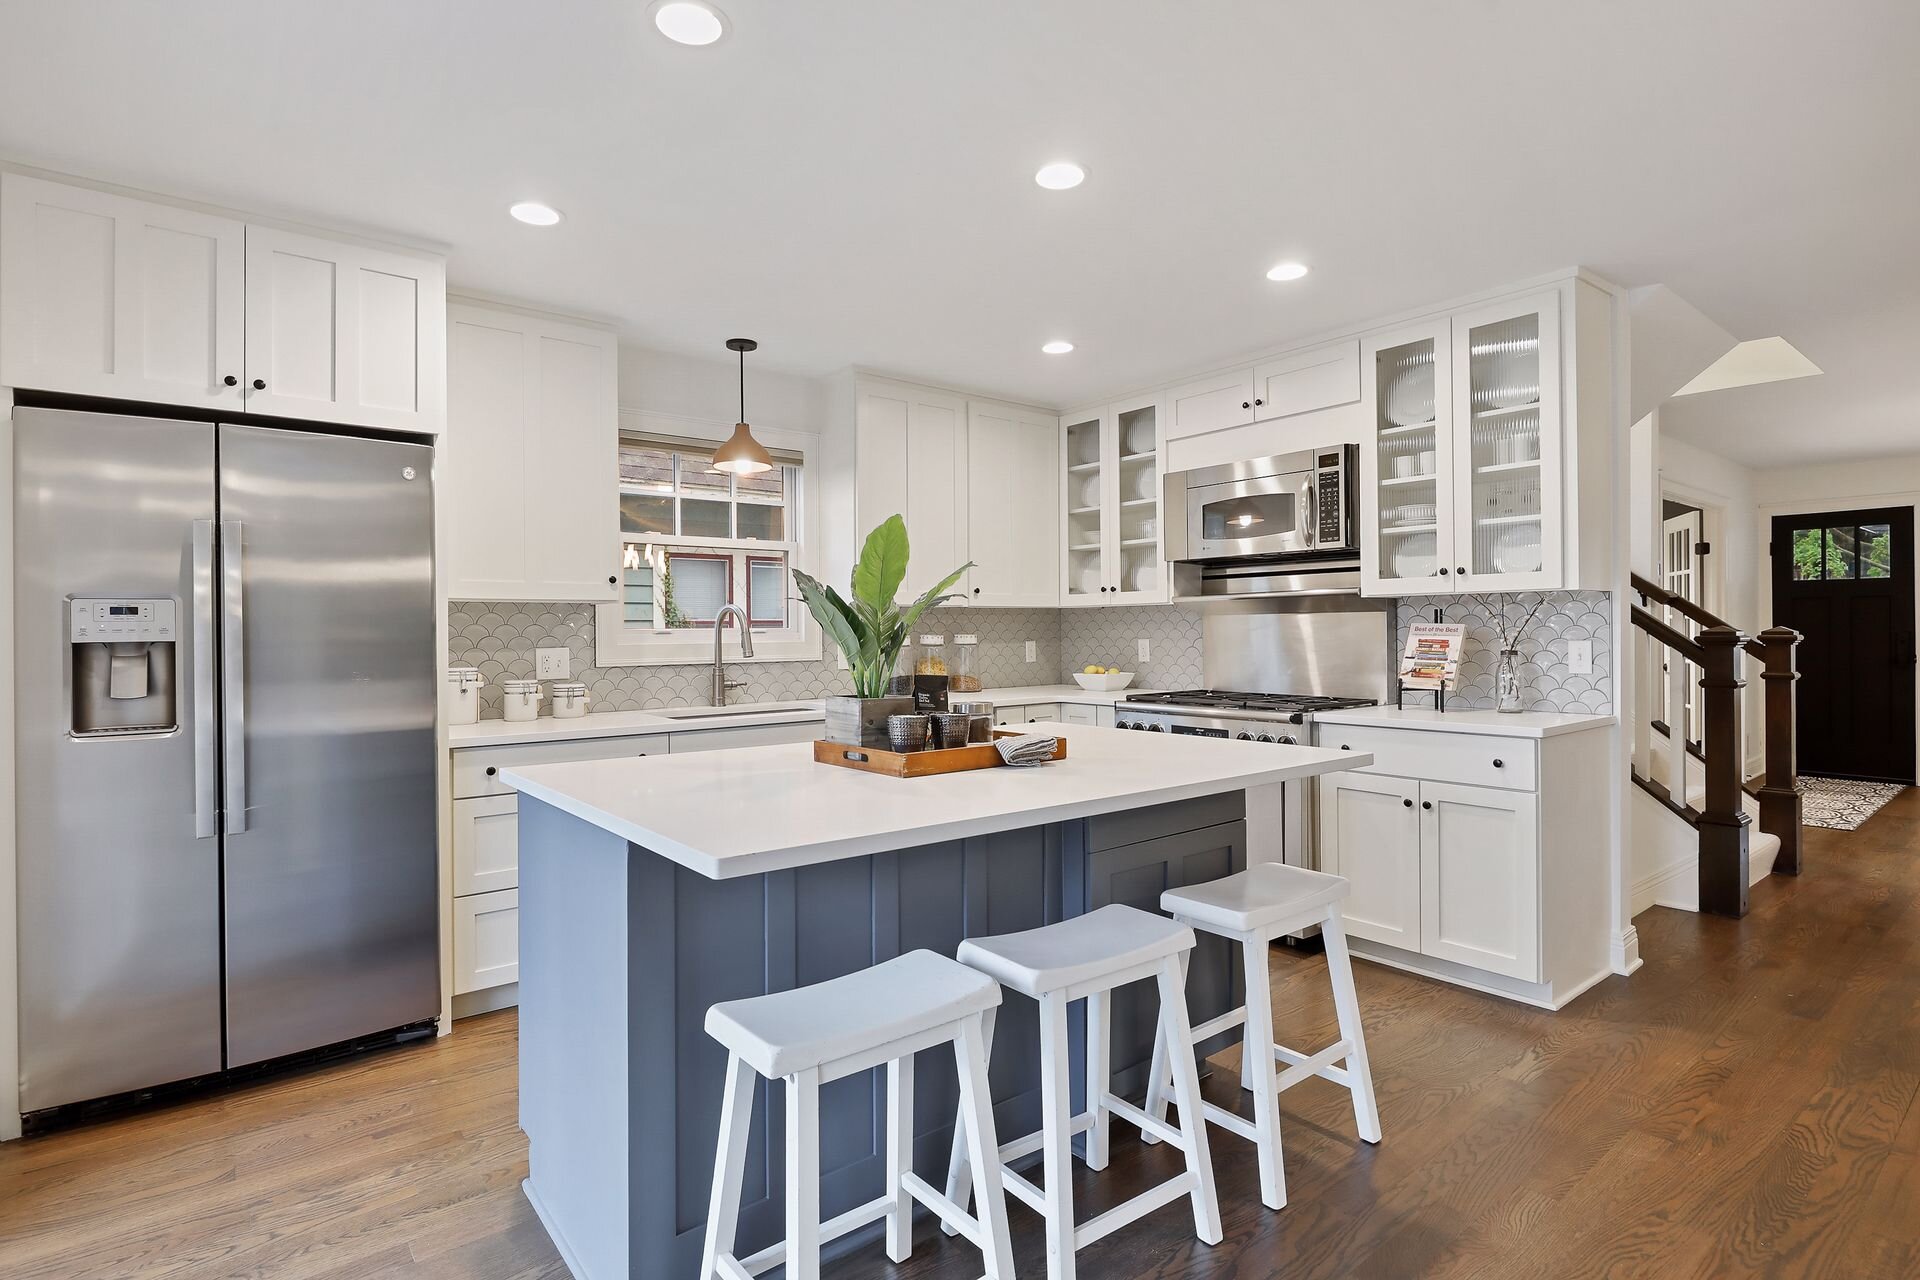 12 Kitchen revovation completed in 2018. Owners chose a larger island with seating, upgraded refrigerator and dishwasher and installed a new tile backsplash.jpg